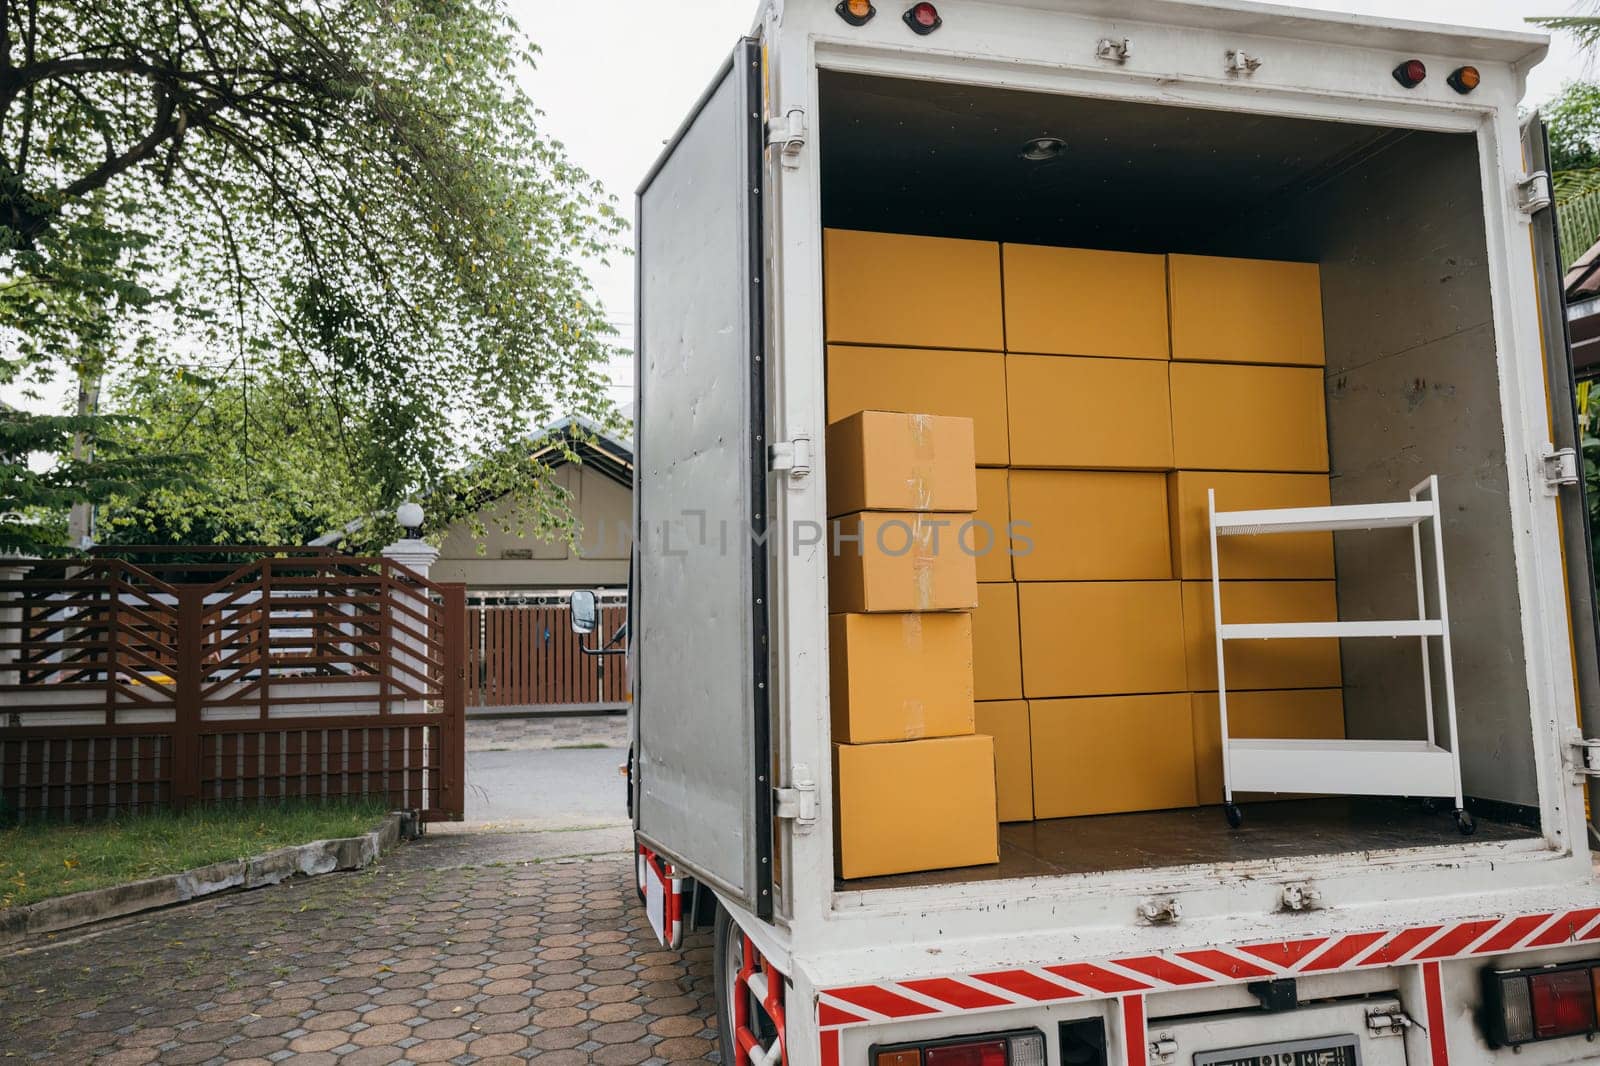 Logistic service outdoors, Open car trunk carrying moving cardboard boxes. White delivery van for house relocation. Transporting items scene. Moving Day Concept. by Sorapop